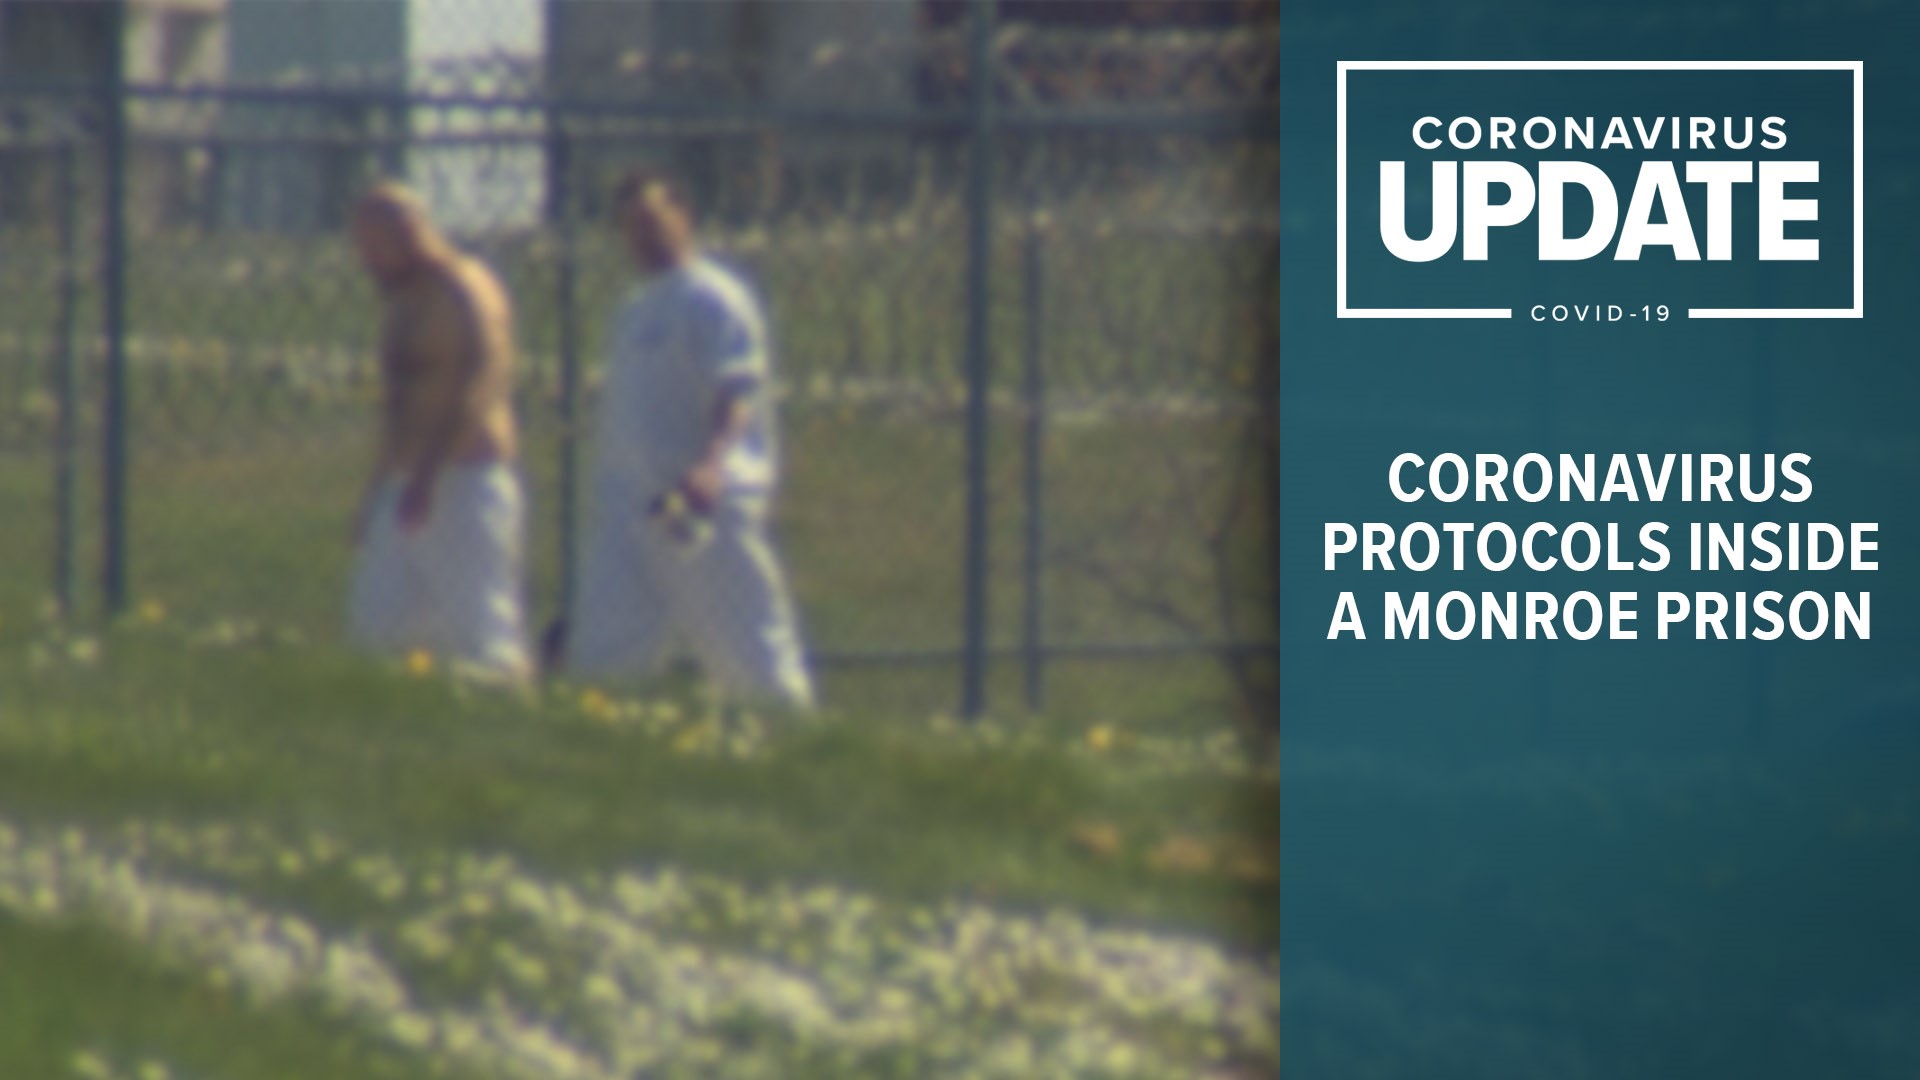 After riots broke out at the Monroe Correctional Complex, questions have been raised about how the prison system is handling coronavirus.